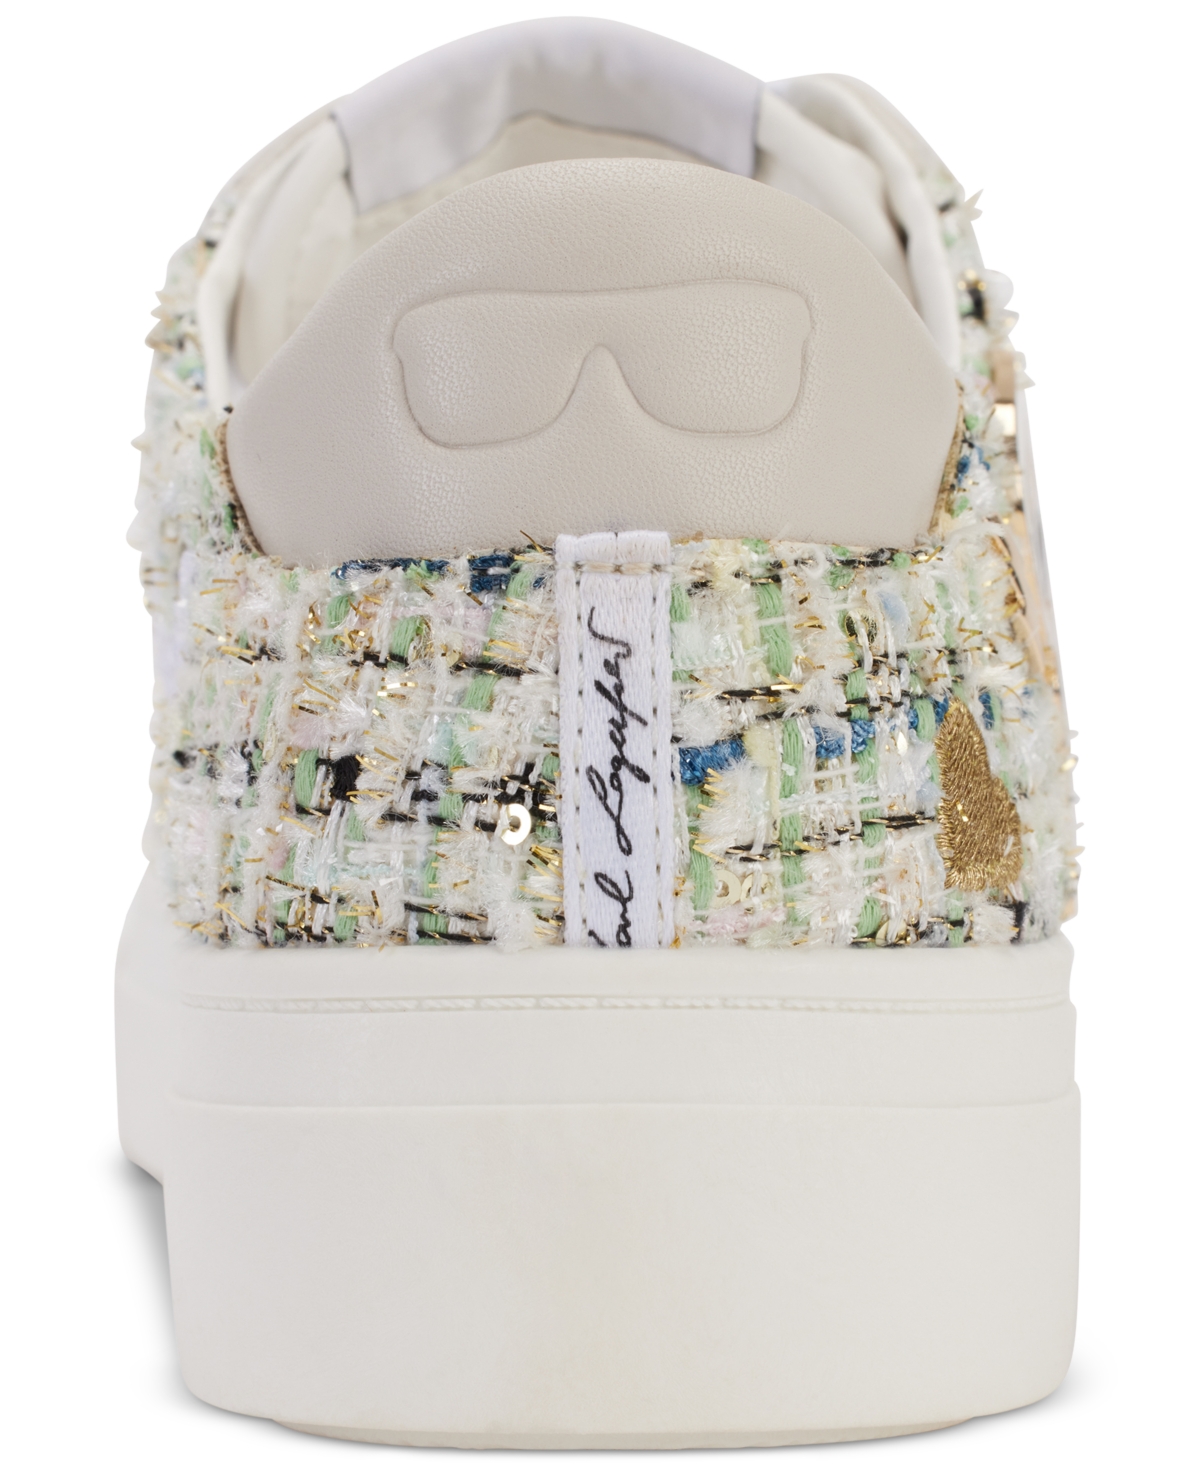 Shop Karl Lagerfeld Cate Pins Lace Up Sneakers In White,green Lake